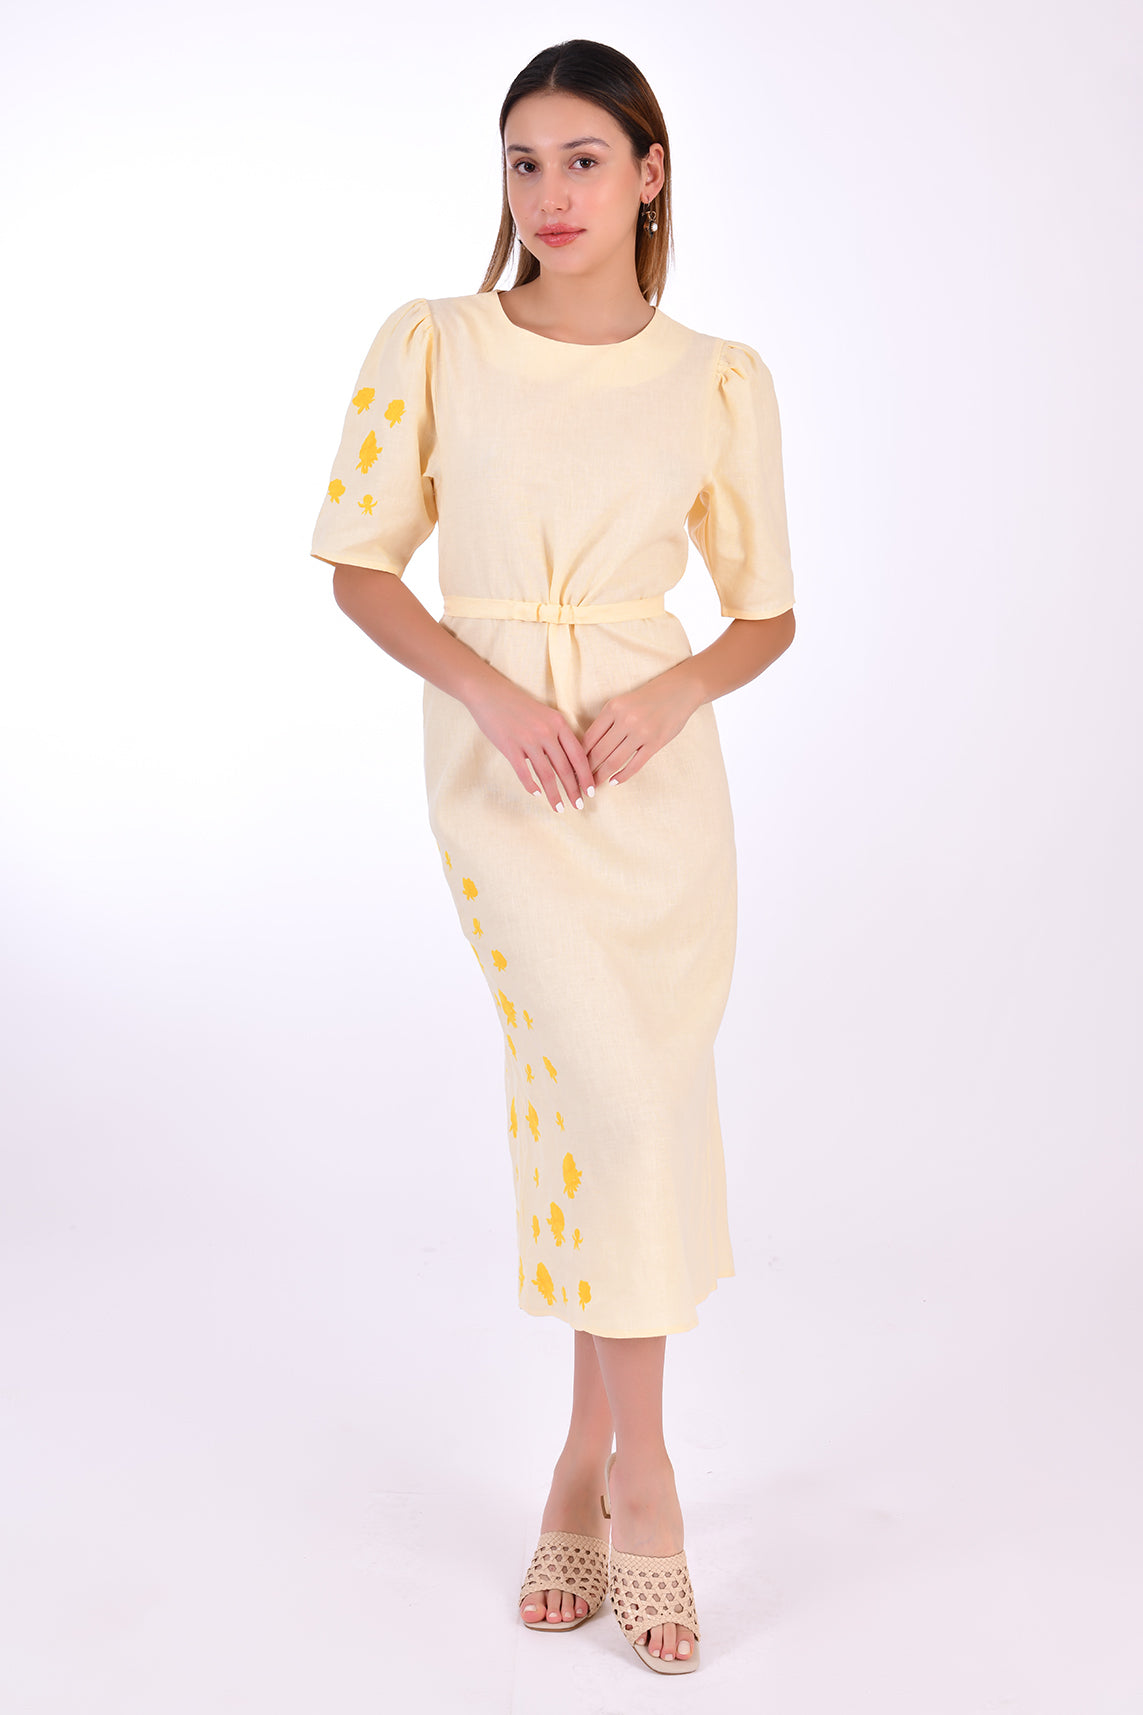 Fanm Mon Doga Midi Linen Dress, Front View Belted. Short Sleeve 100% Linen Dress, featuring a peephole open back and button closure. Round neck, with a belt for the waist (can be worn with or without), and features front embroidery detail. 